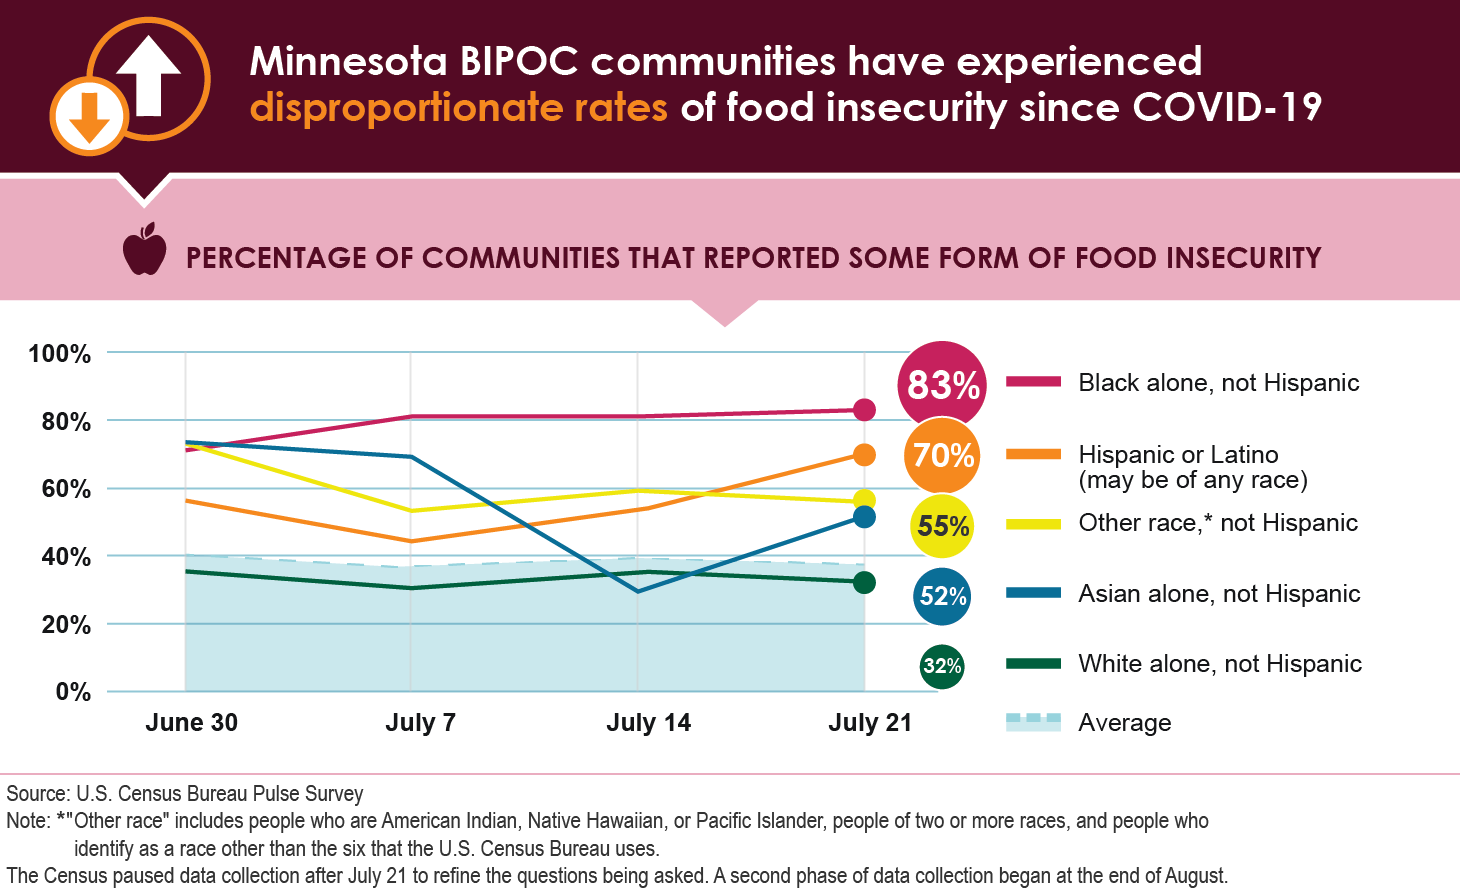 This line graph shows compares Minnesota the percentages of communities that reported some form of food insecurity from June 30 to July 21, 2020 by race.